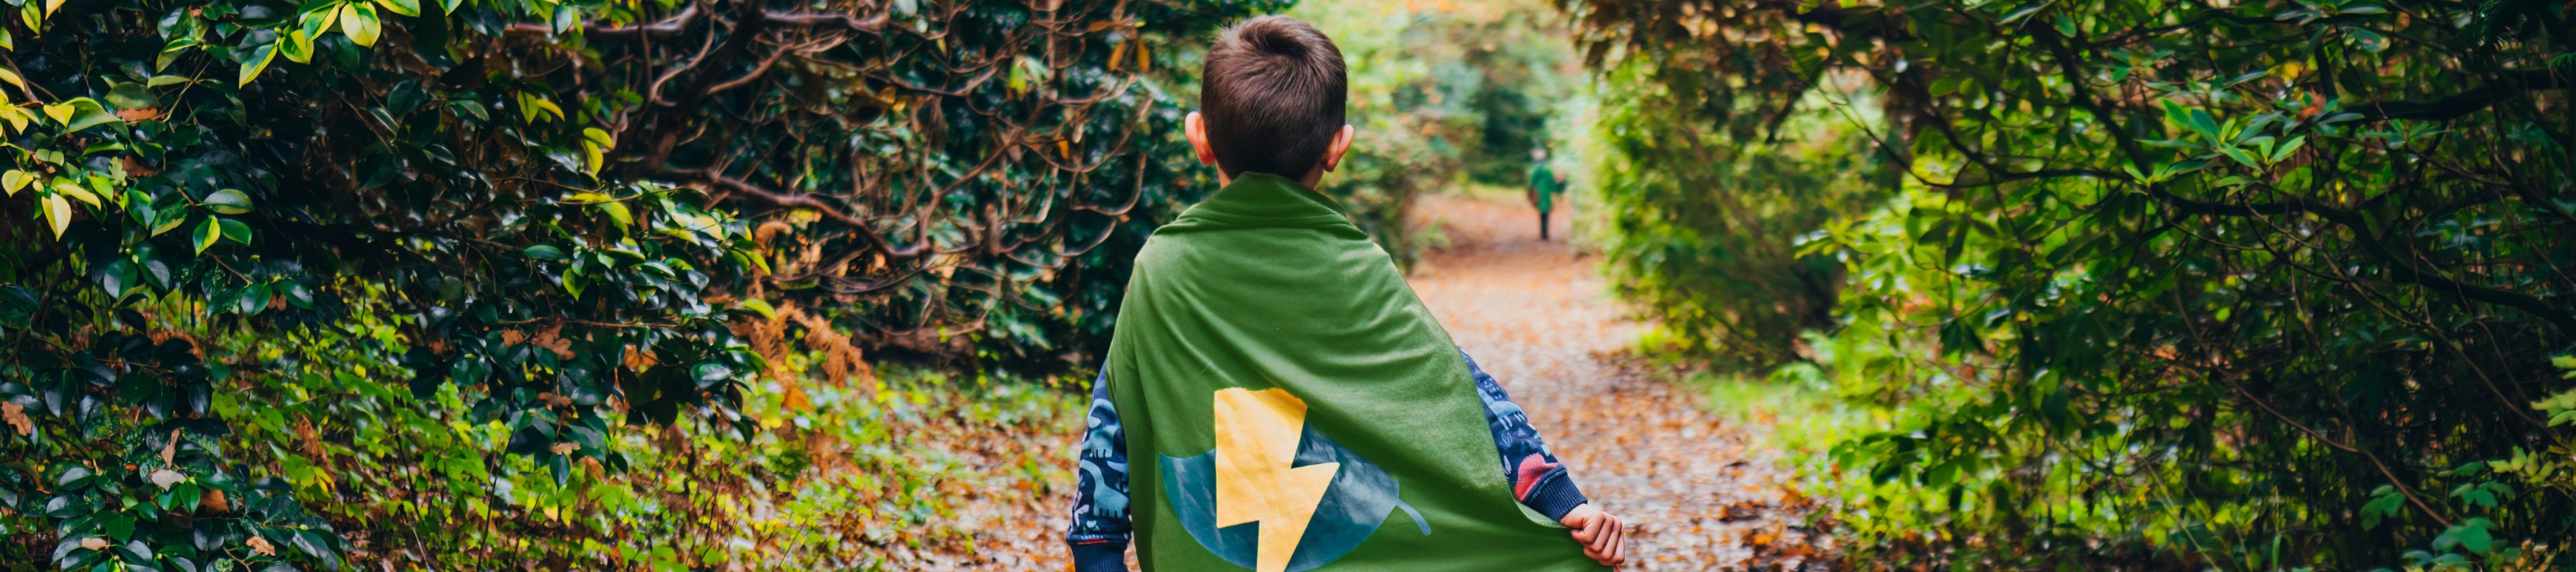 A child walks along a wooded path at Wakehurst wearing a superhero cap with a lightning bolt on it